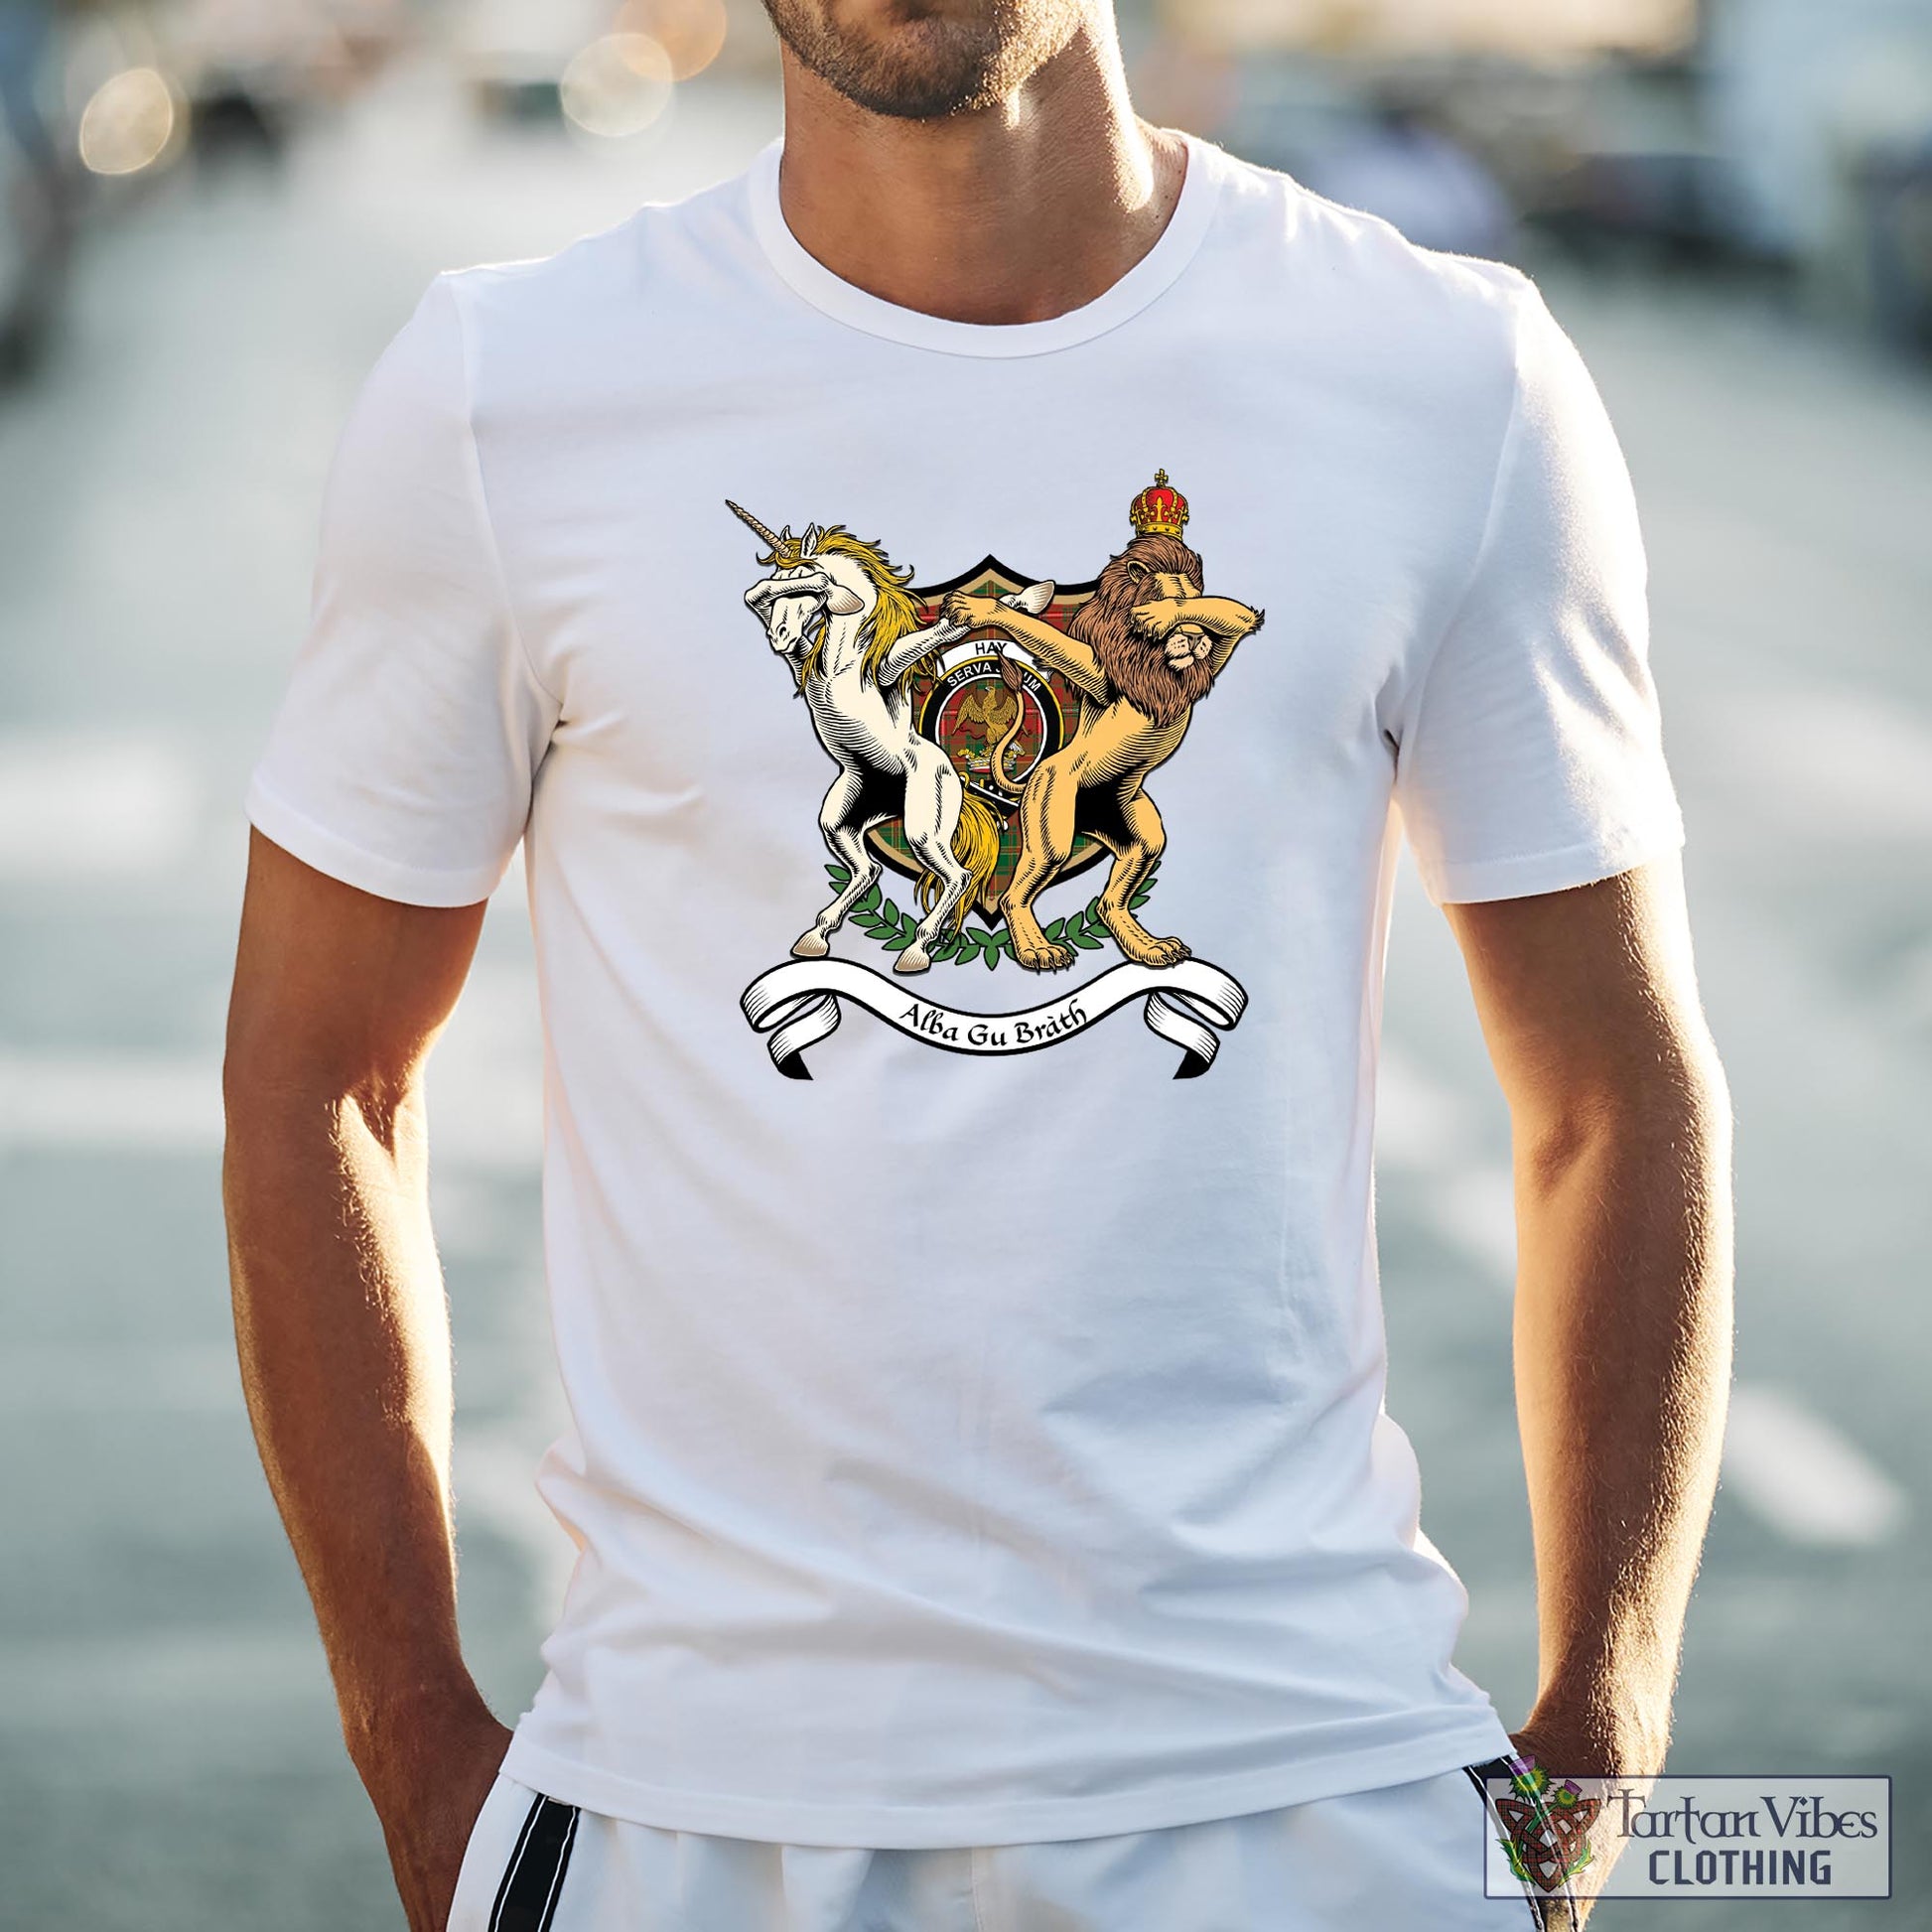 Tartan Vibes Clothing Hay Ancient Family Crest Cotton Men's T-Shirt with Scotland Royal Coat Of Arm Funny Style